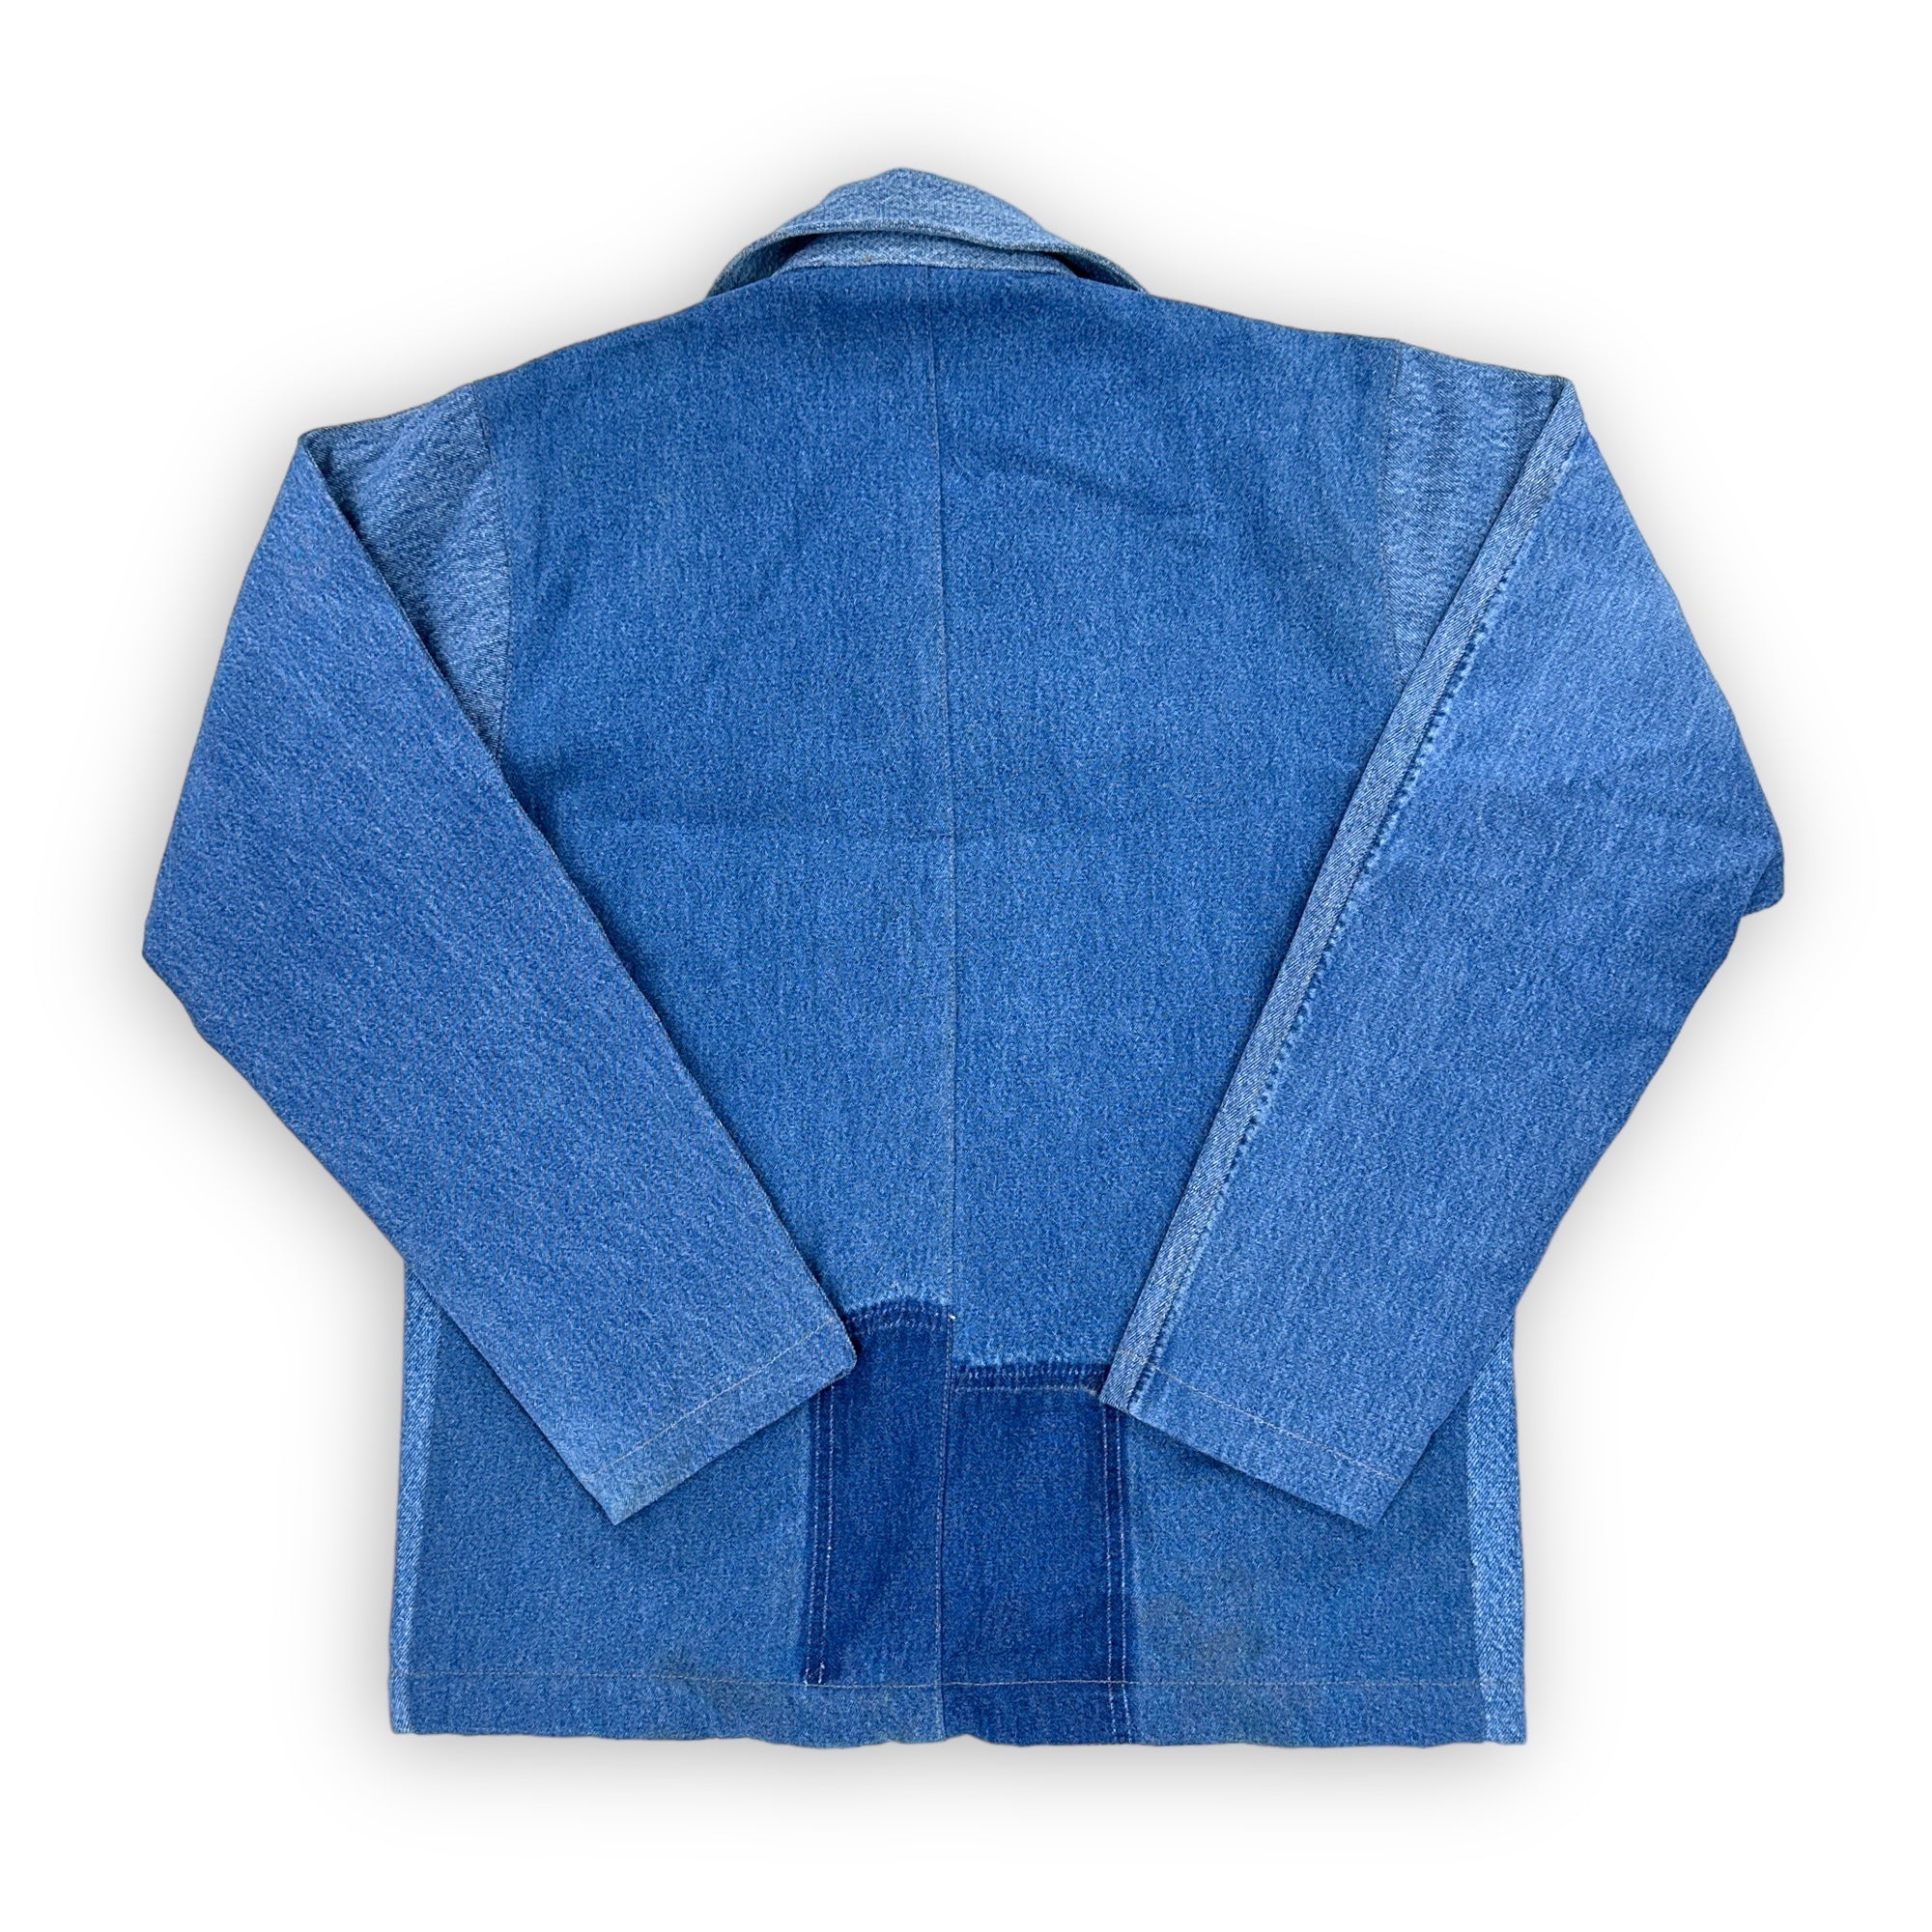 Chore Coat Made From Recycled Dickies Work Jeans - Small-4